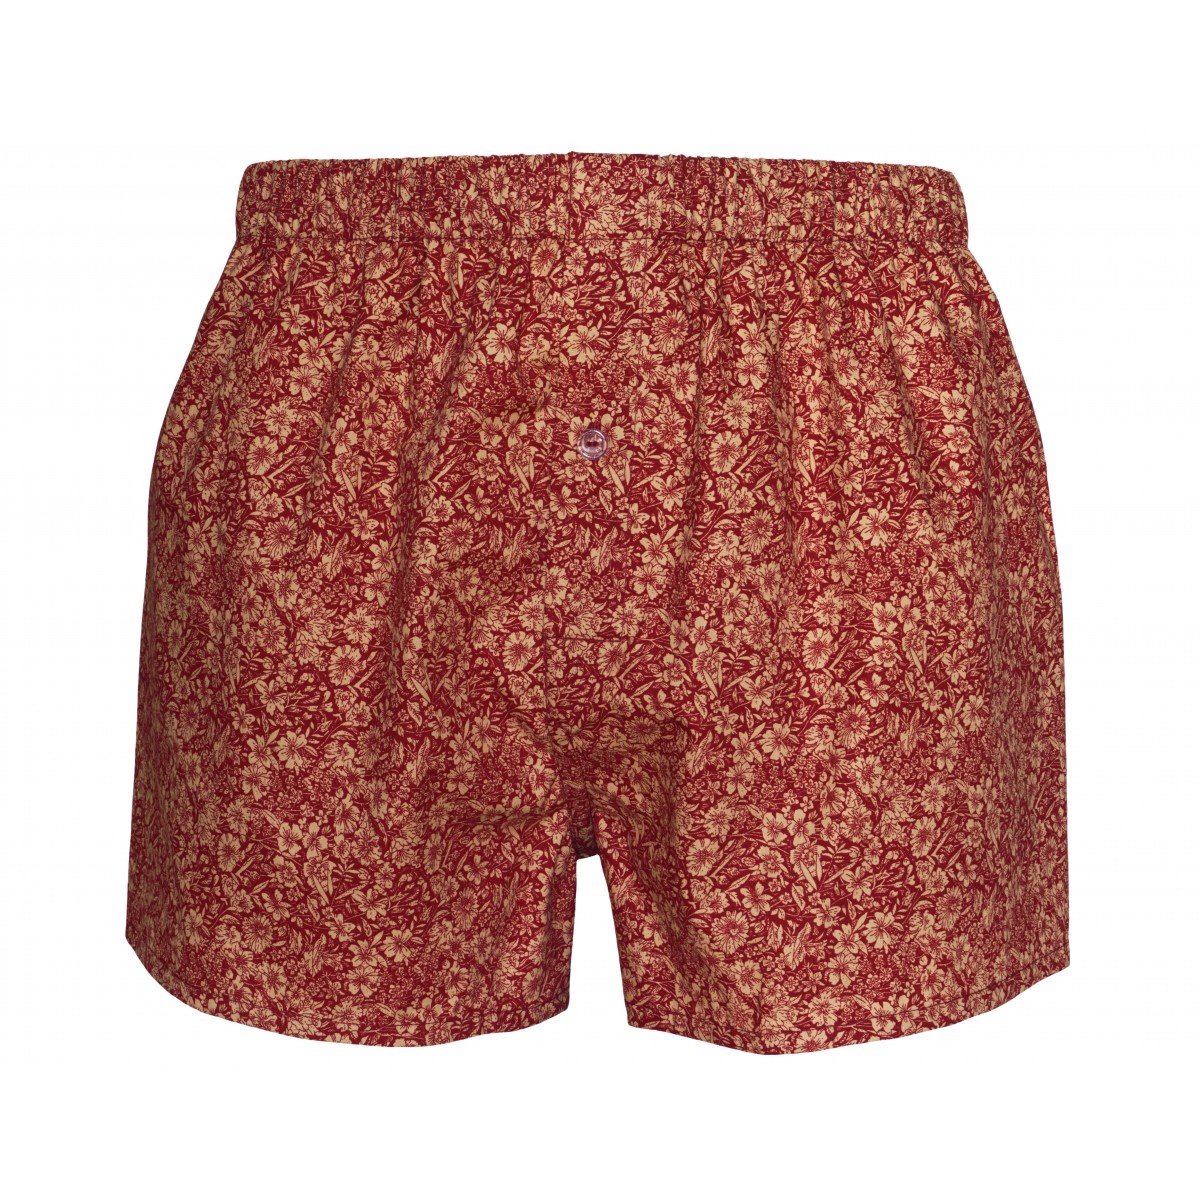 I really like these,  its a subtle elegant tan floral pattern on a wine red background. We now have the matching pocket square hankies too... Perfect for a wedding or just to treat someone special.... #giftforhim #giftforher